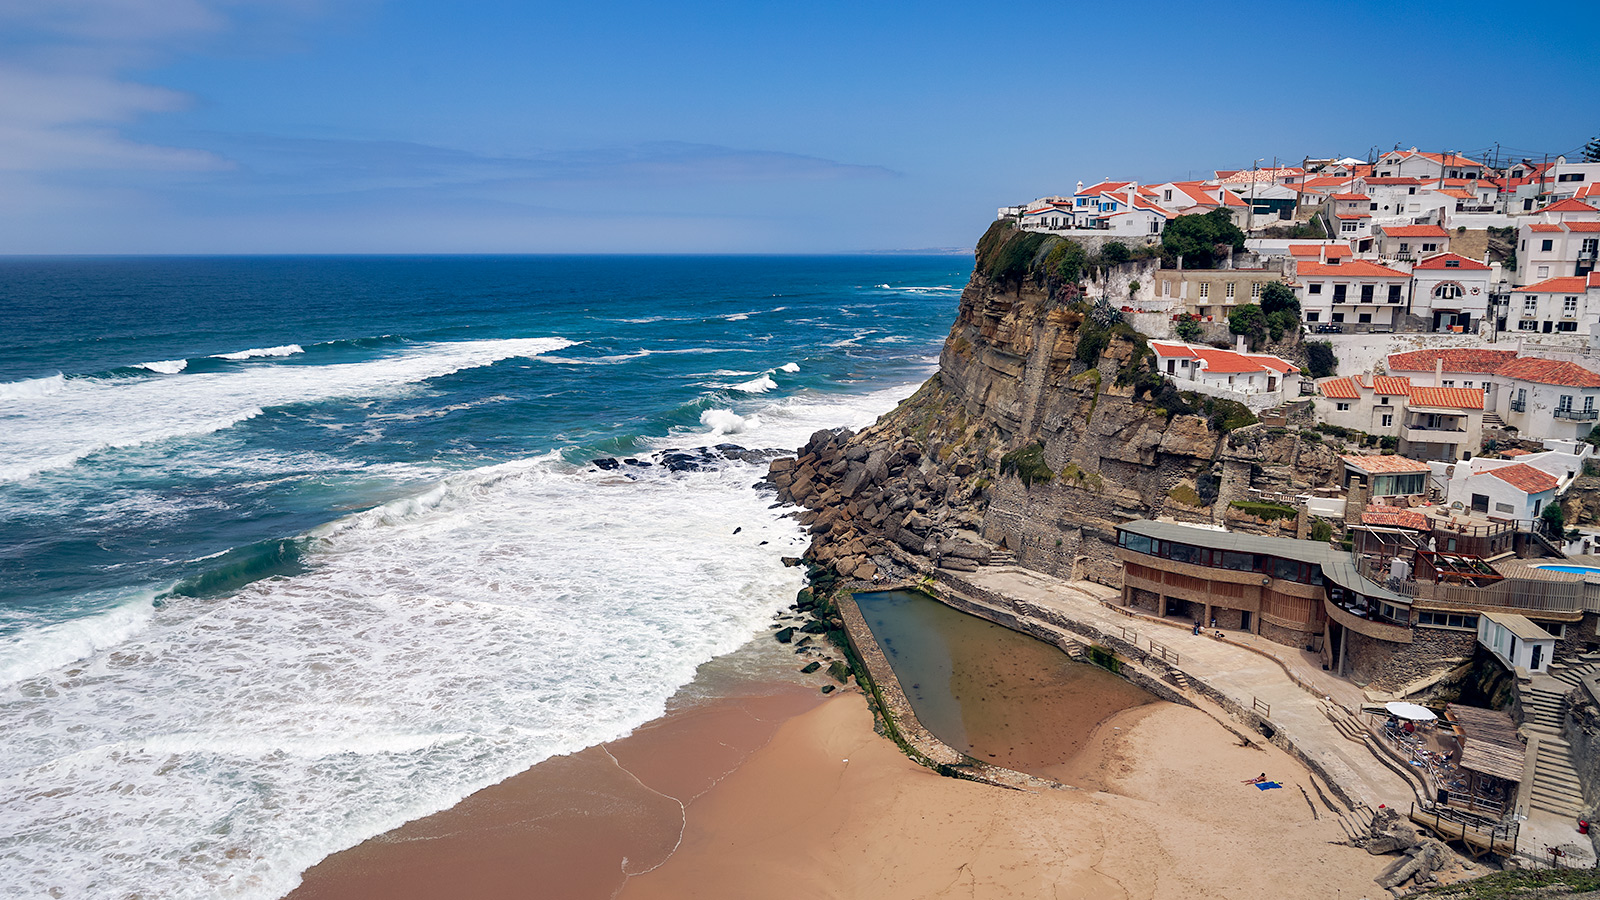 Azenhas do Mar is a picturesque, tiny village on the cliffs